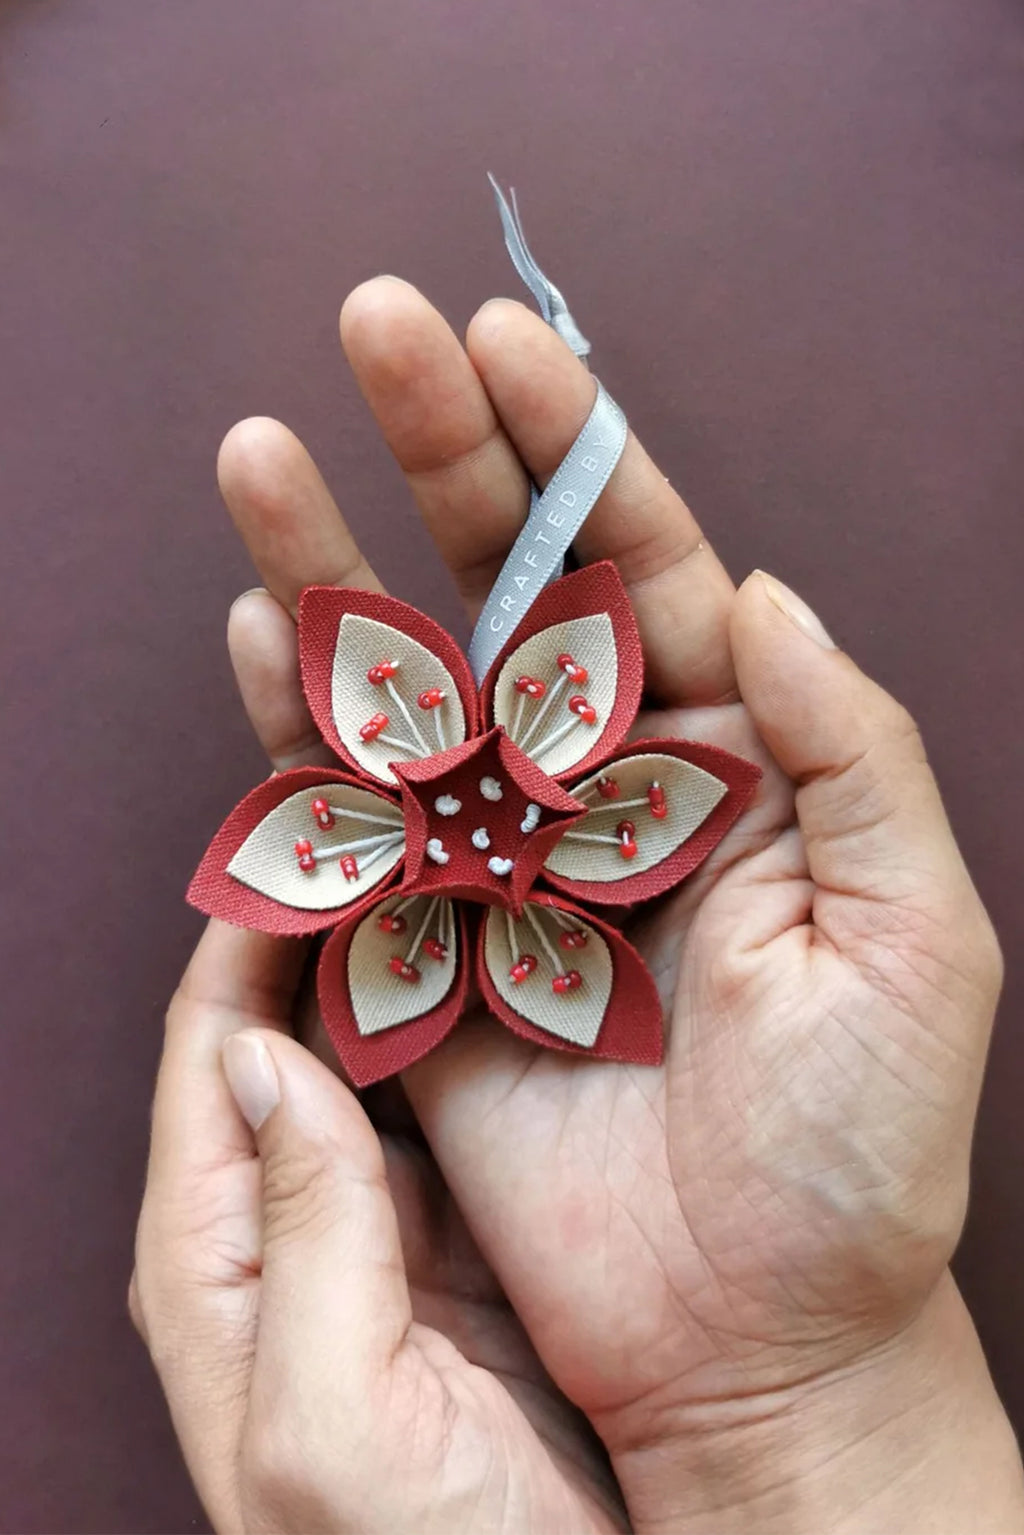 MADE51 Flower of Life Ornament, Crafted by Syrian refugees in Lebanon